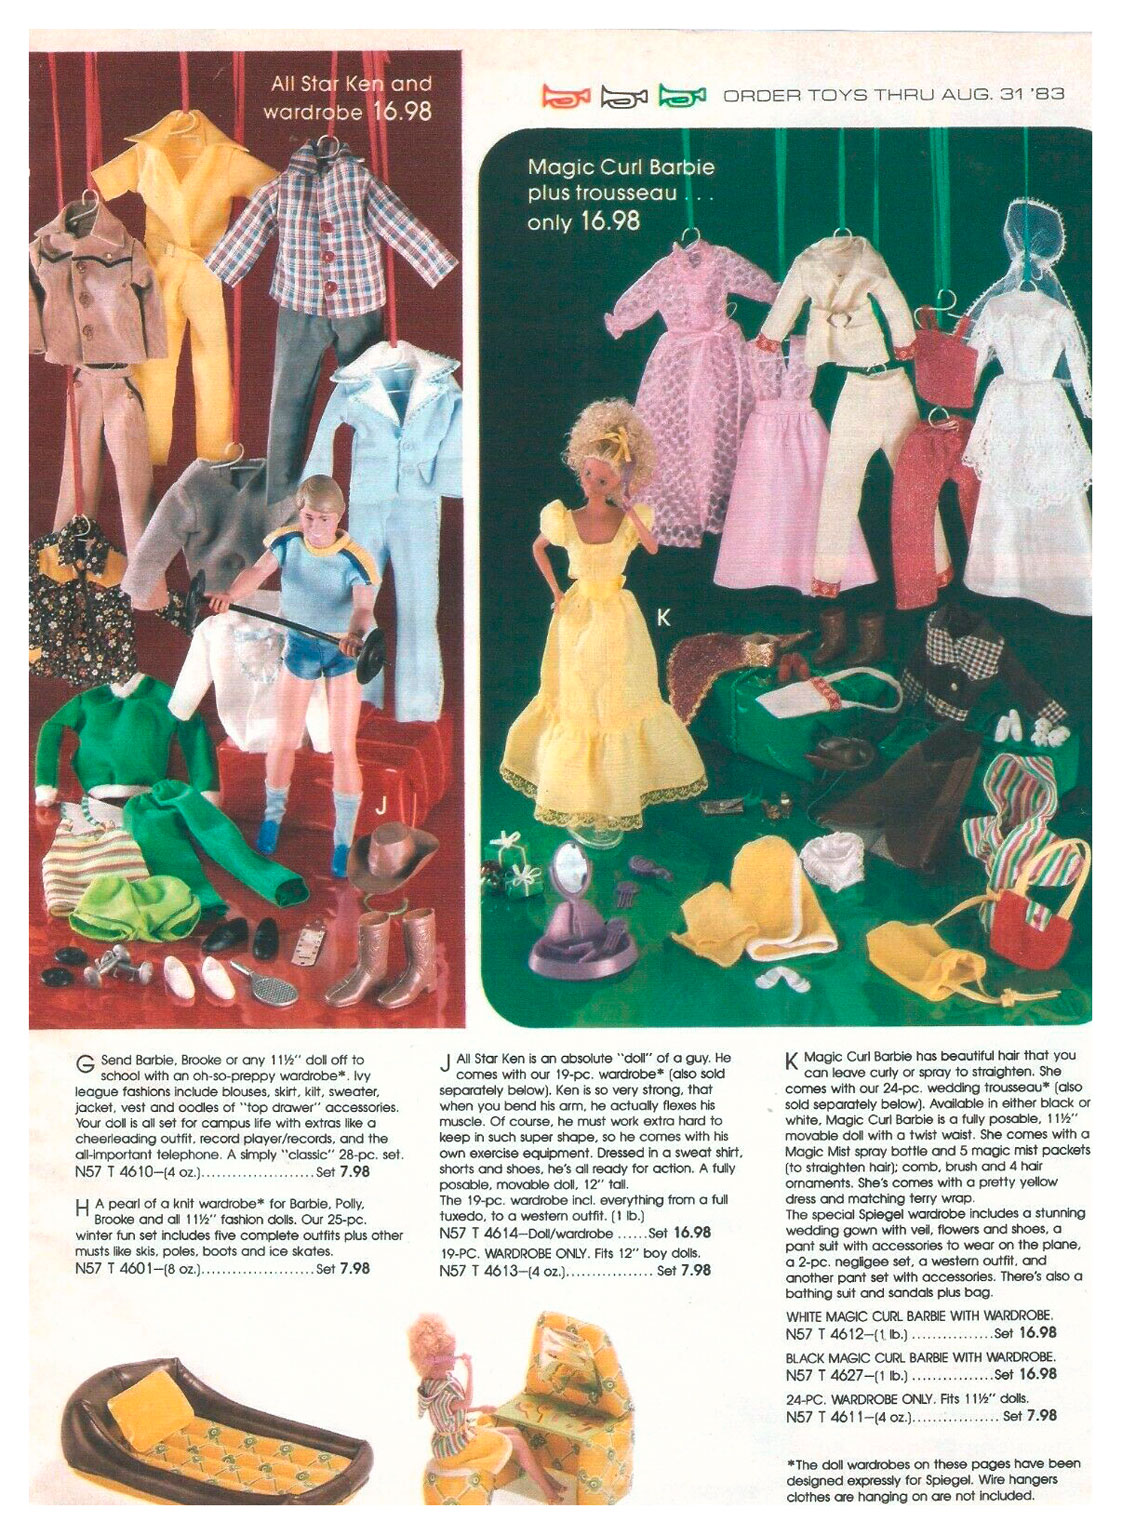 From 1982 Spiegel Christmas catalogue